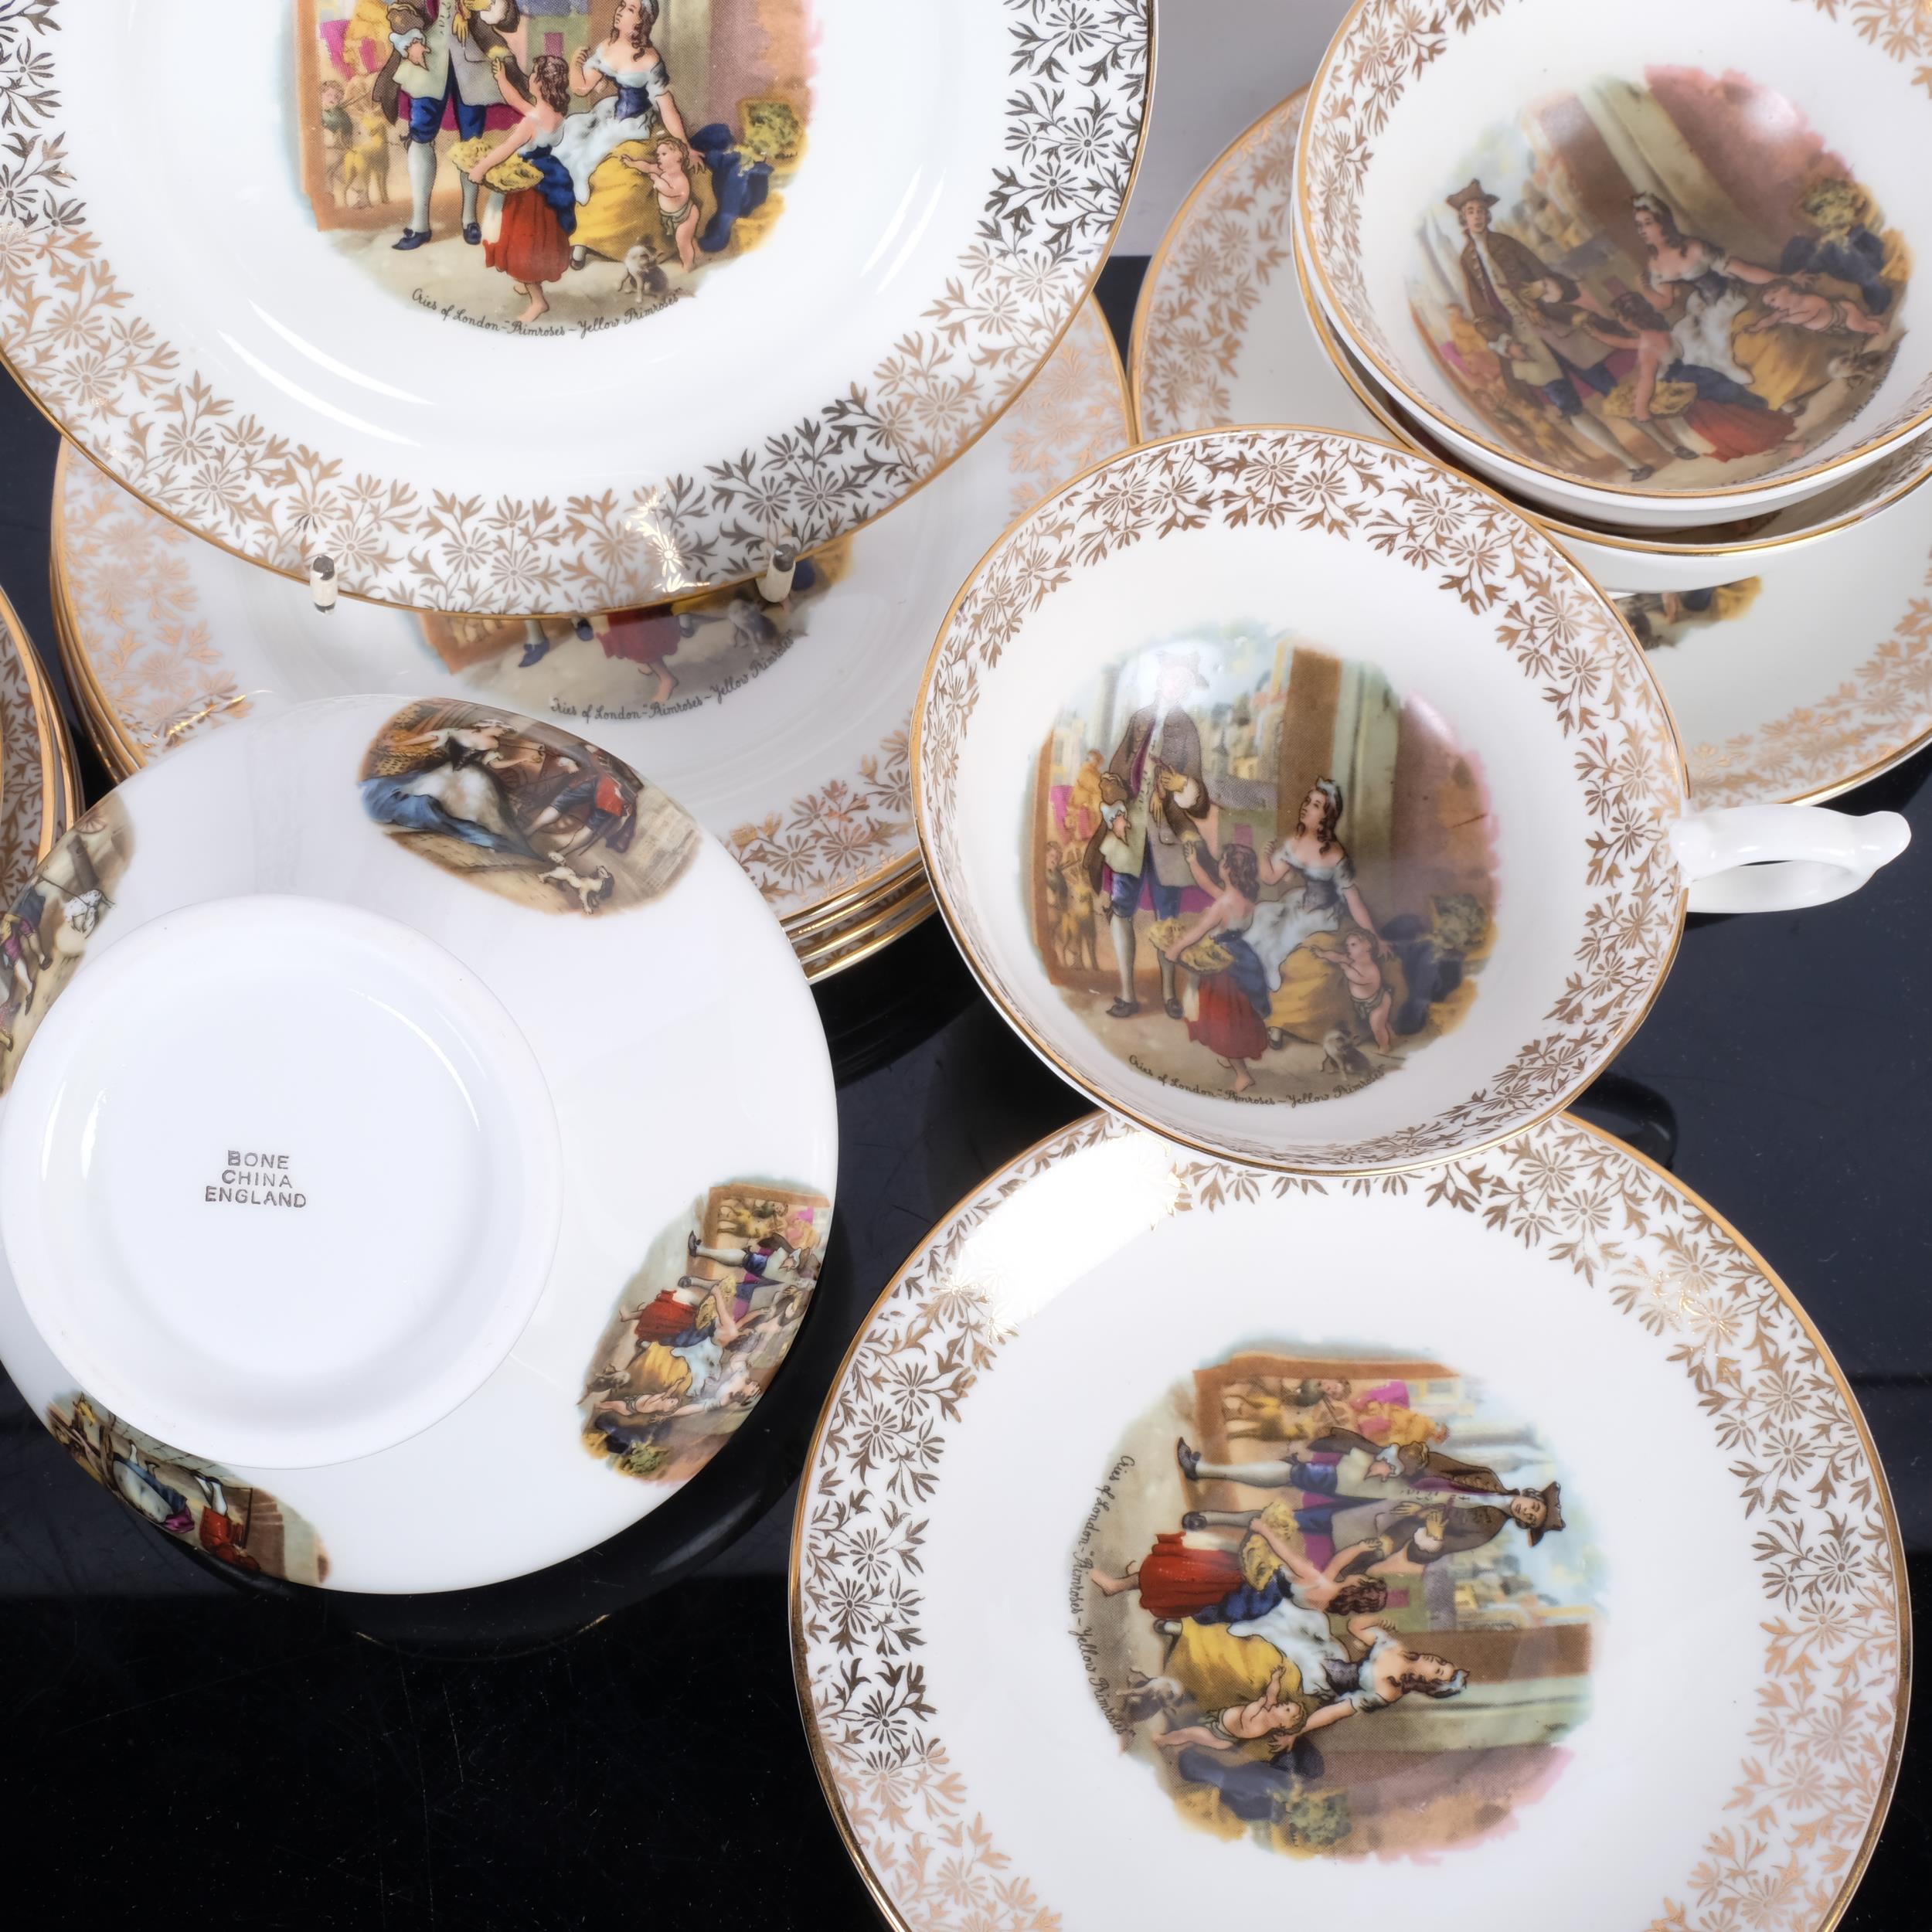 1950s Cries of London tea set for 6 people - Image 2 of 2